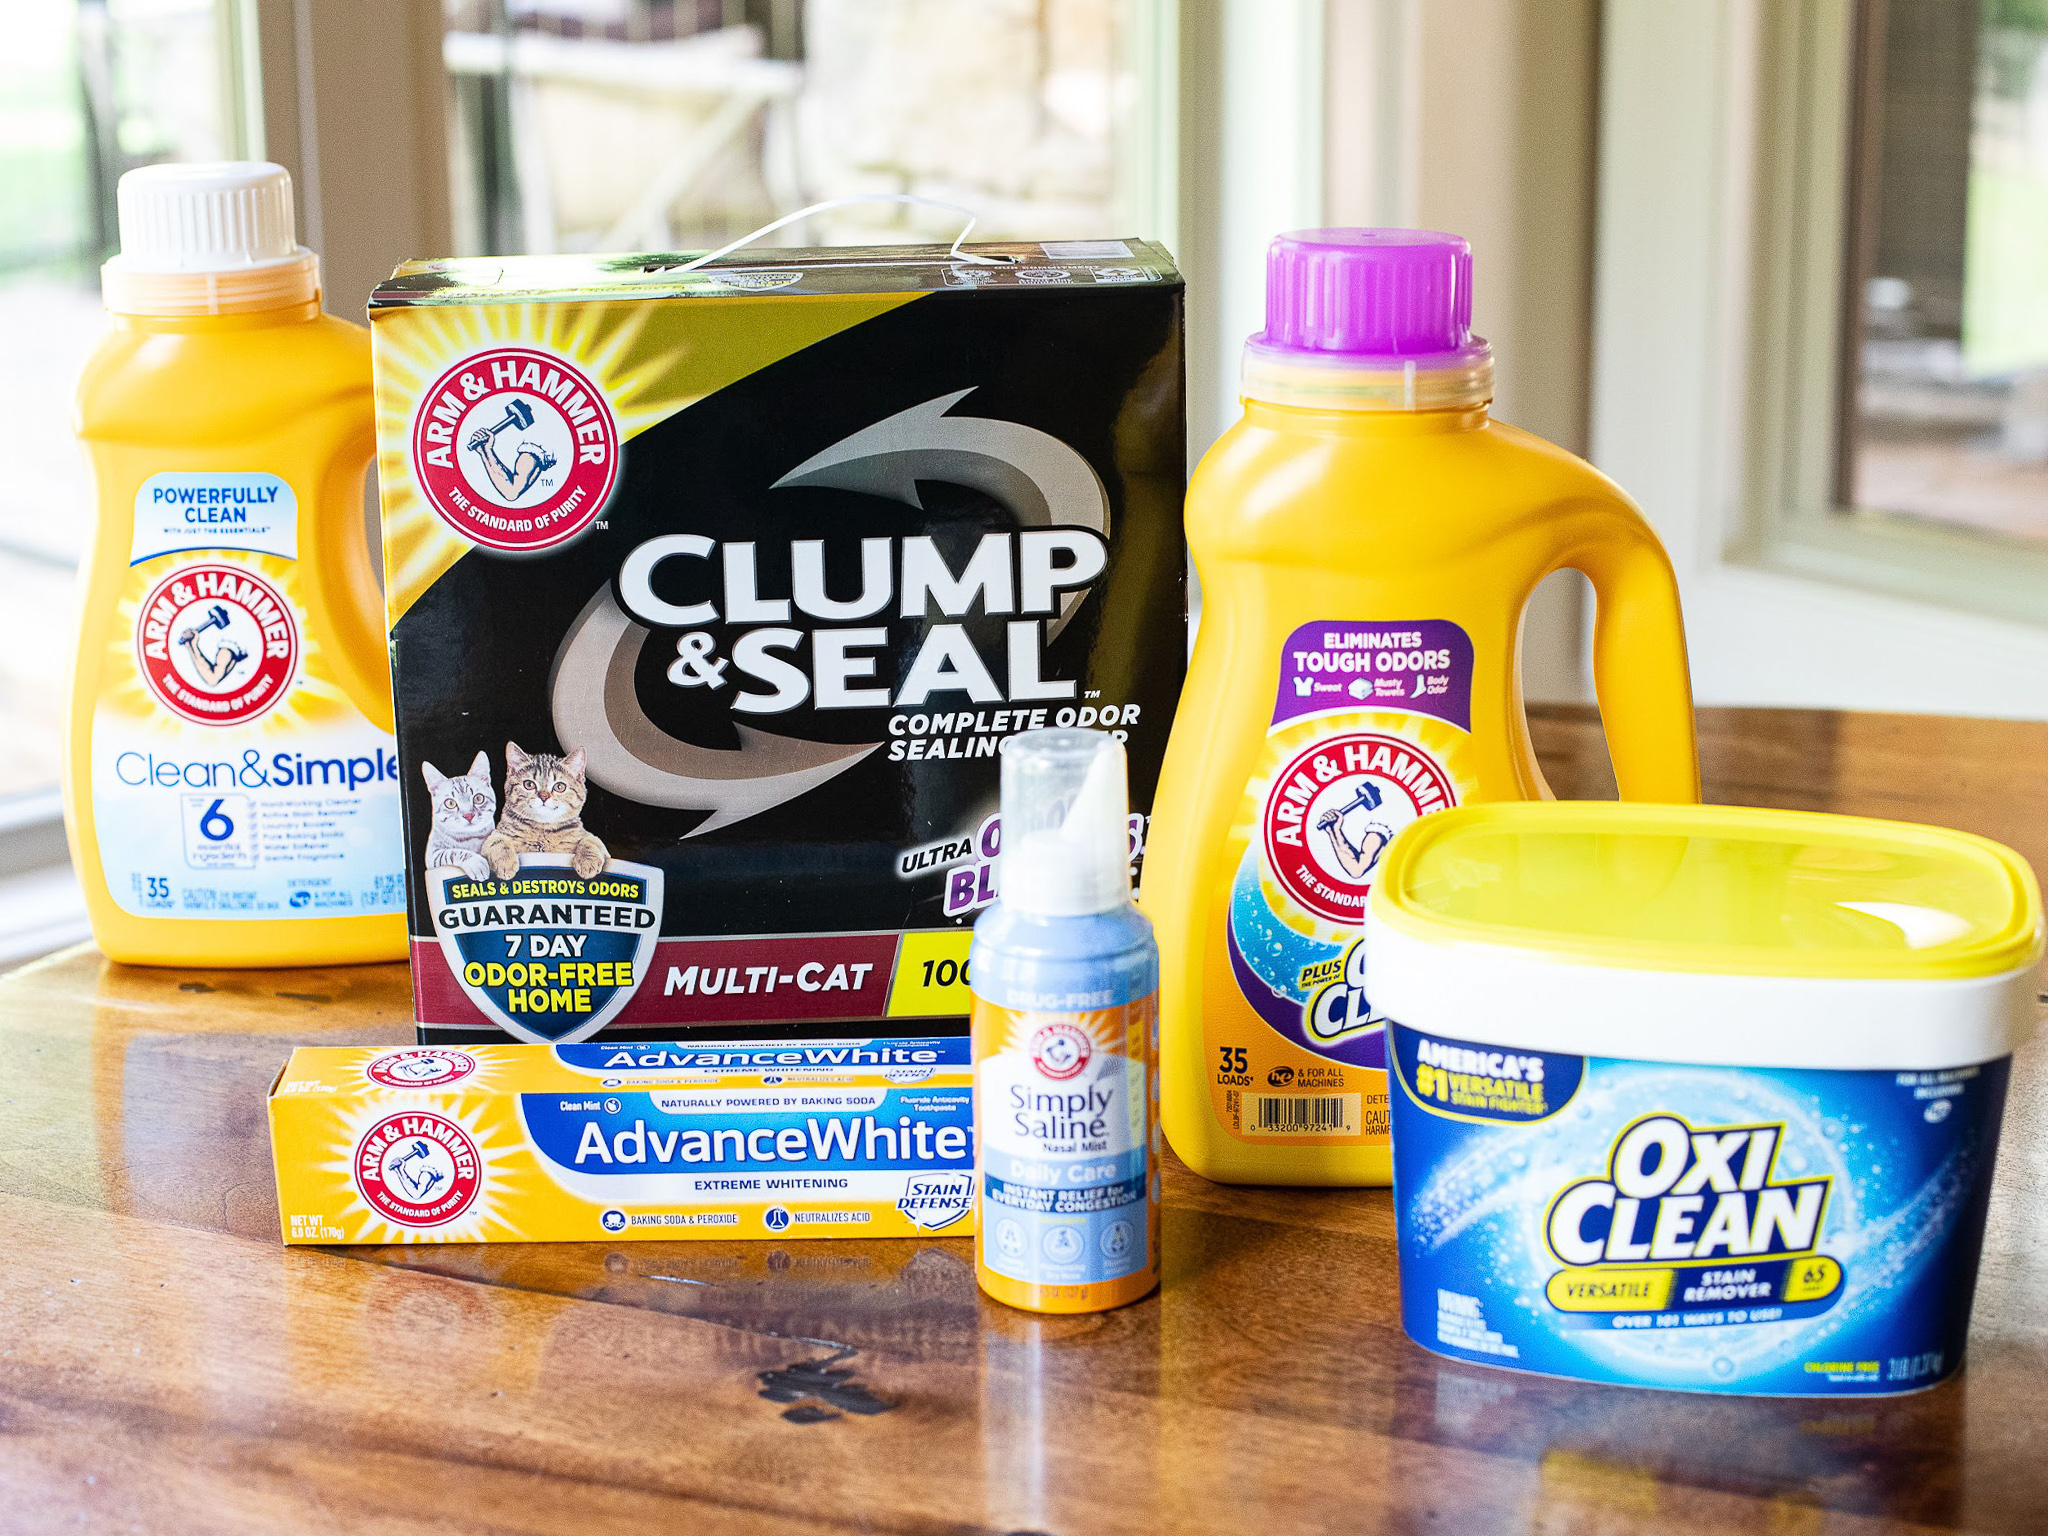 Rally To Win With ARM & HAMMER™ and OxiClean™ - Bring Home The Products You Trust & Enter To Win Great Prizes! on I Heart Publix 2